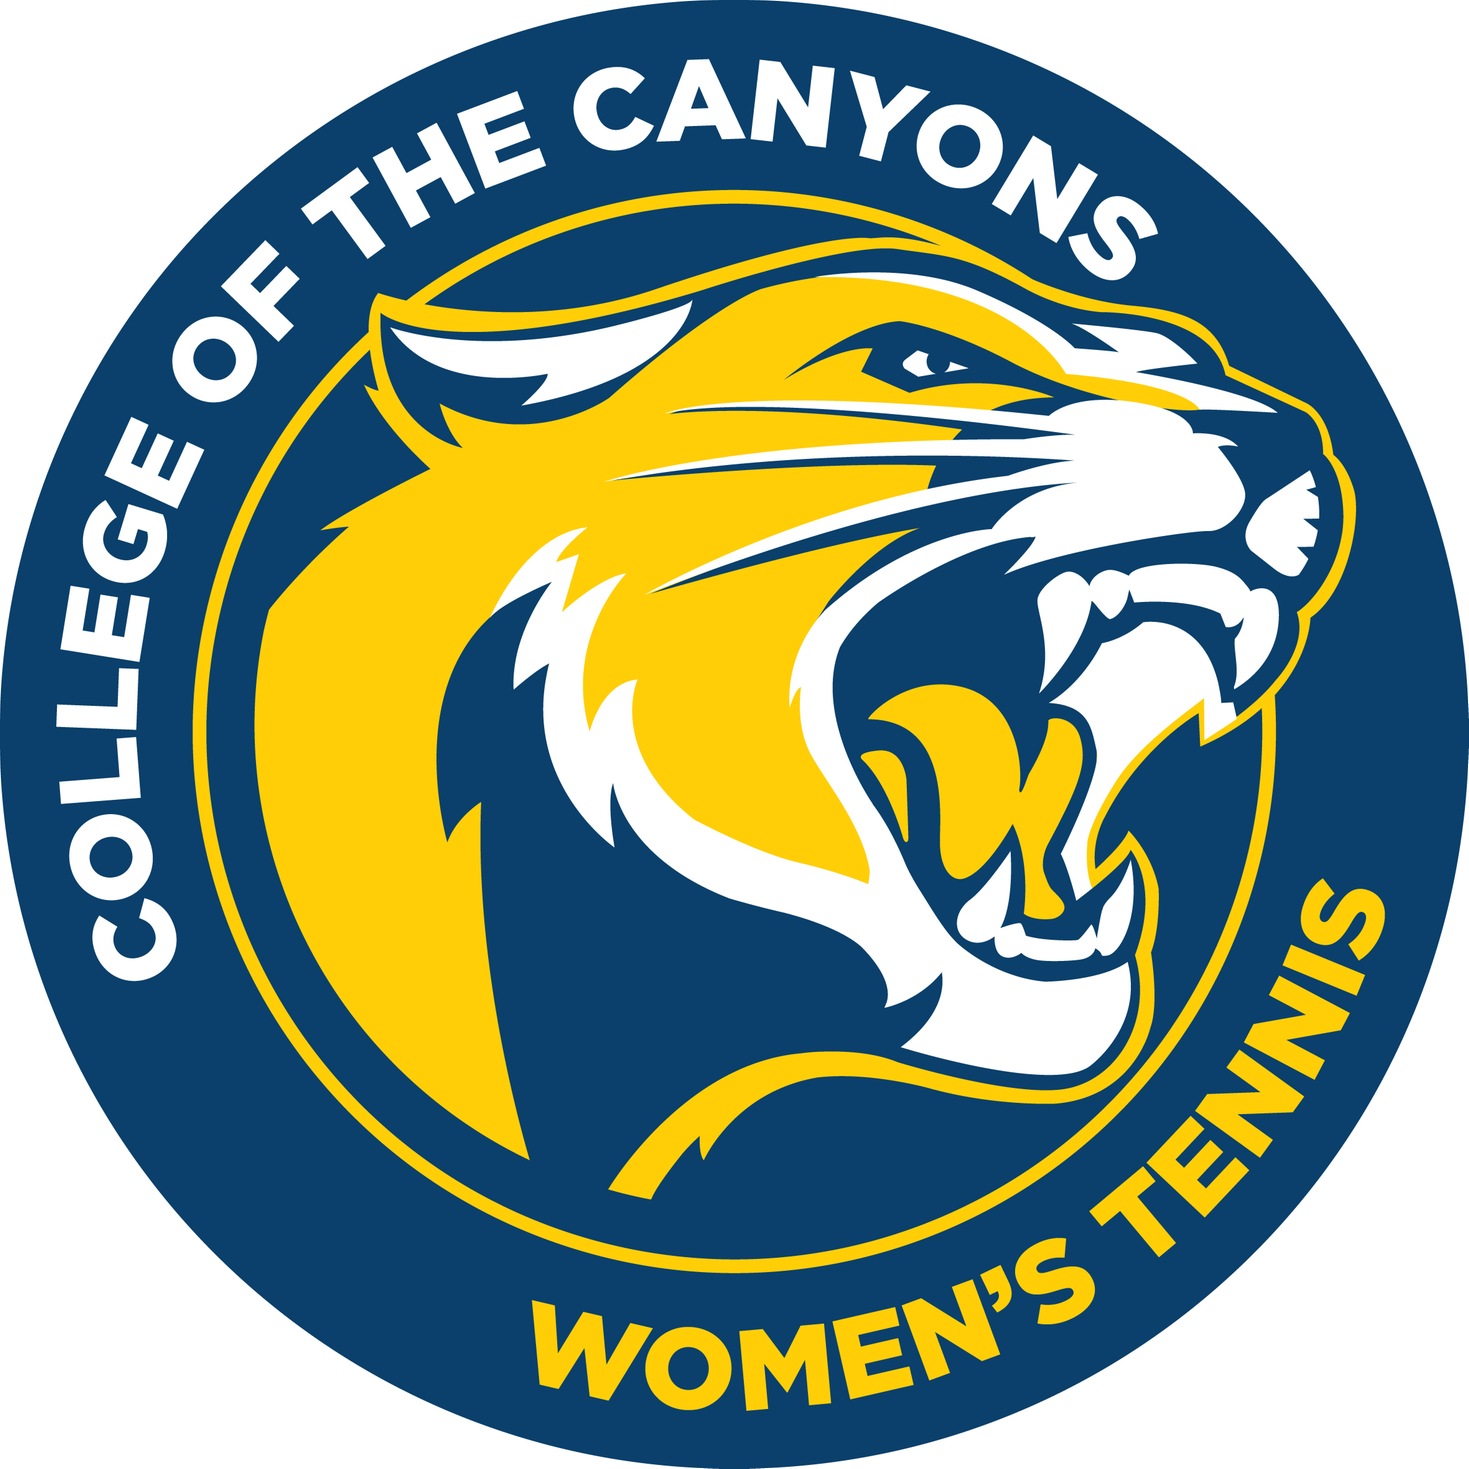 College of the Canyons women's tennis logo.